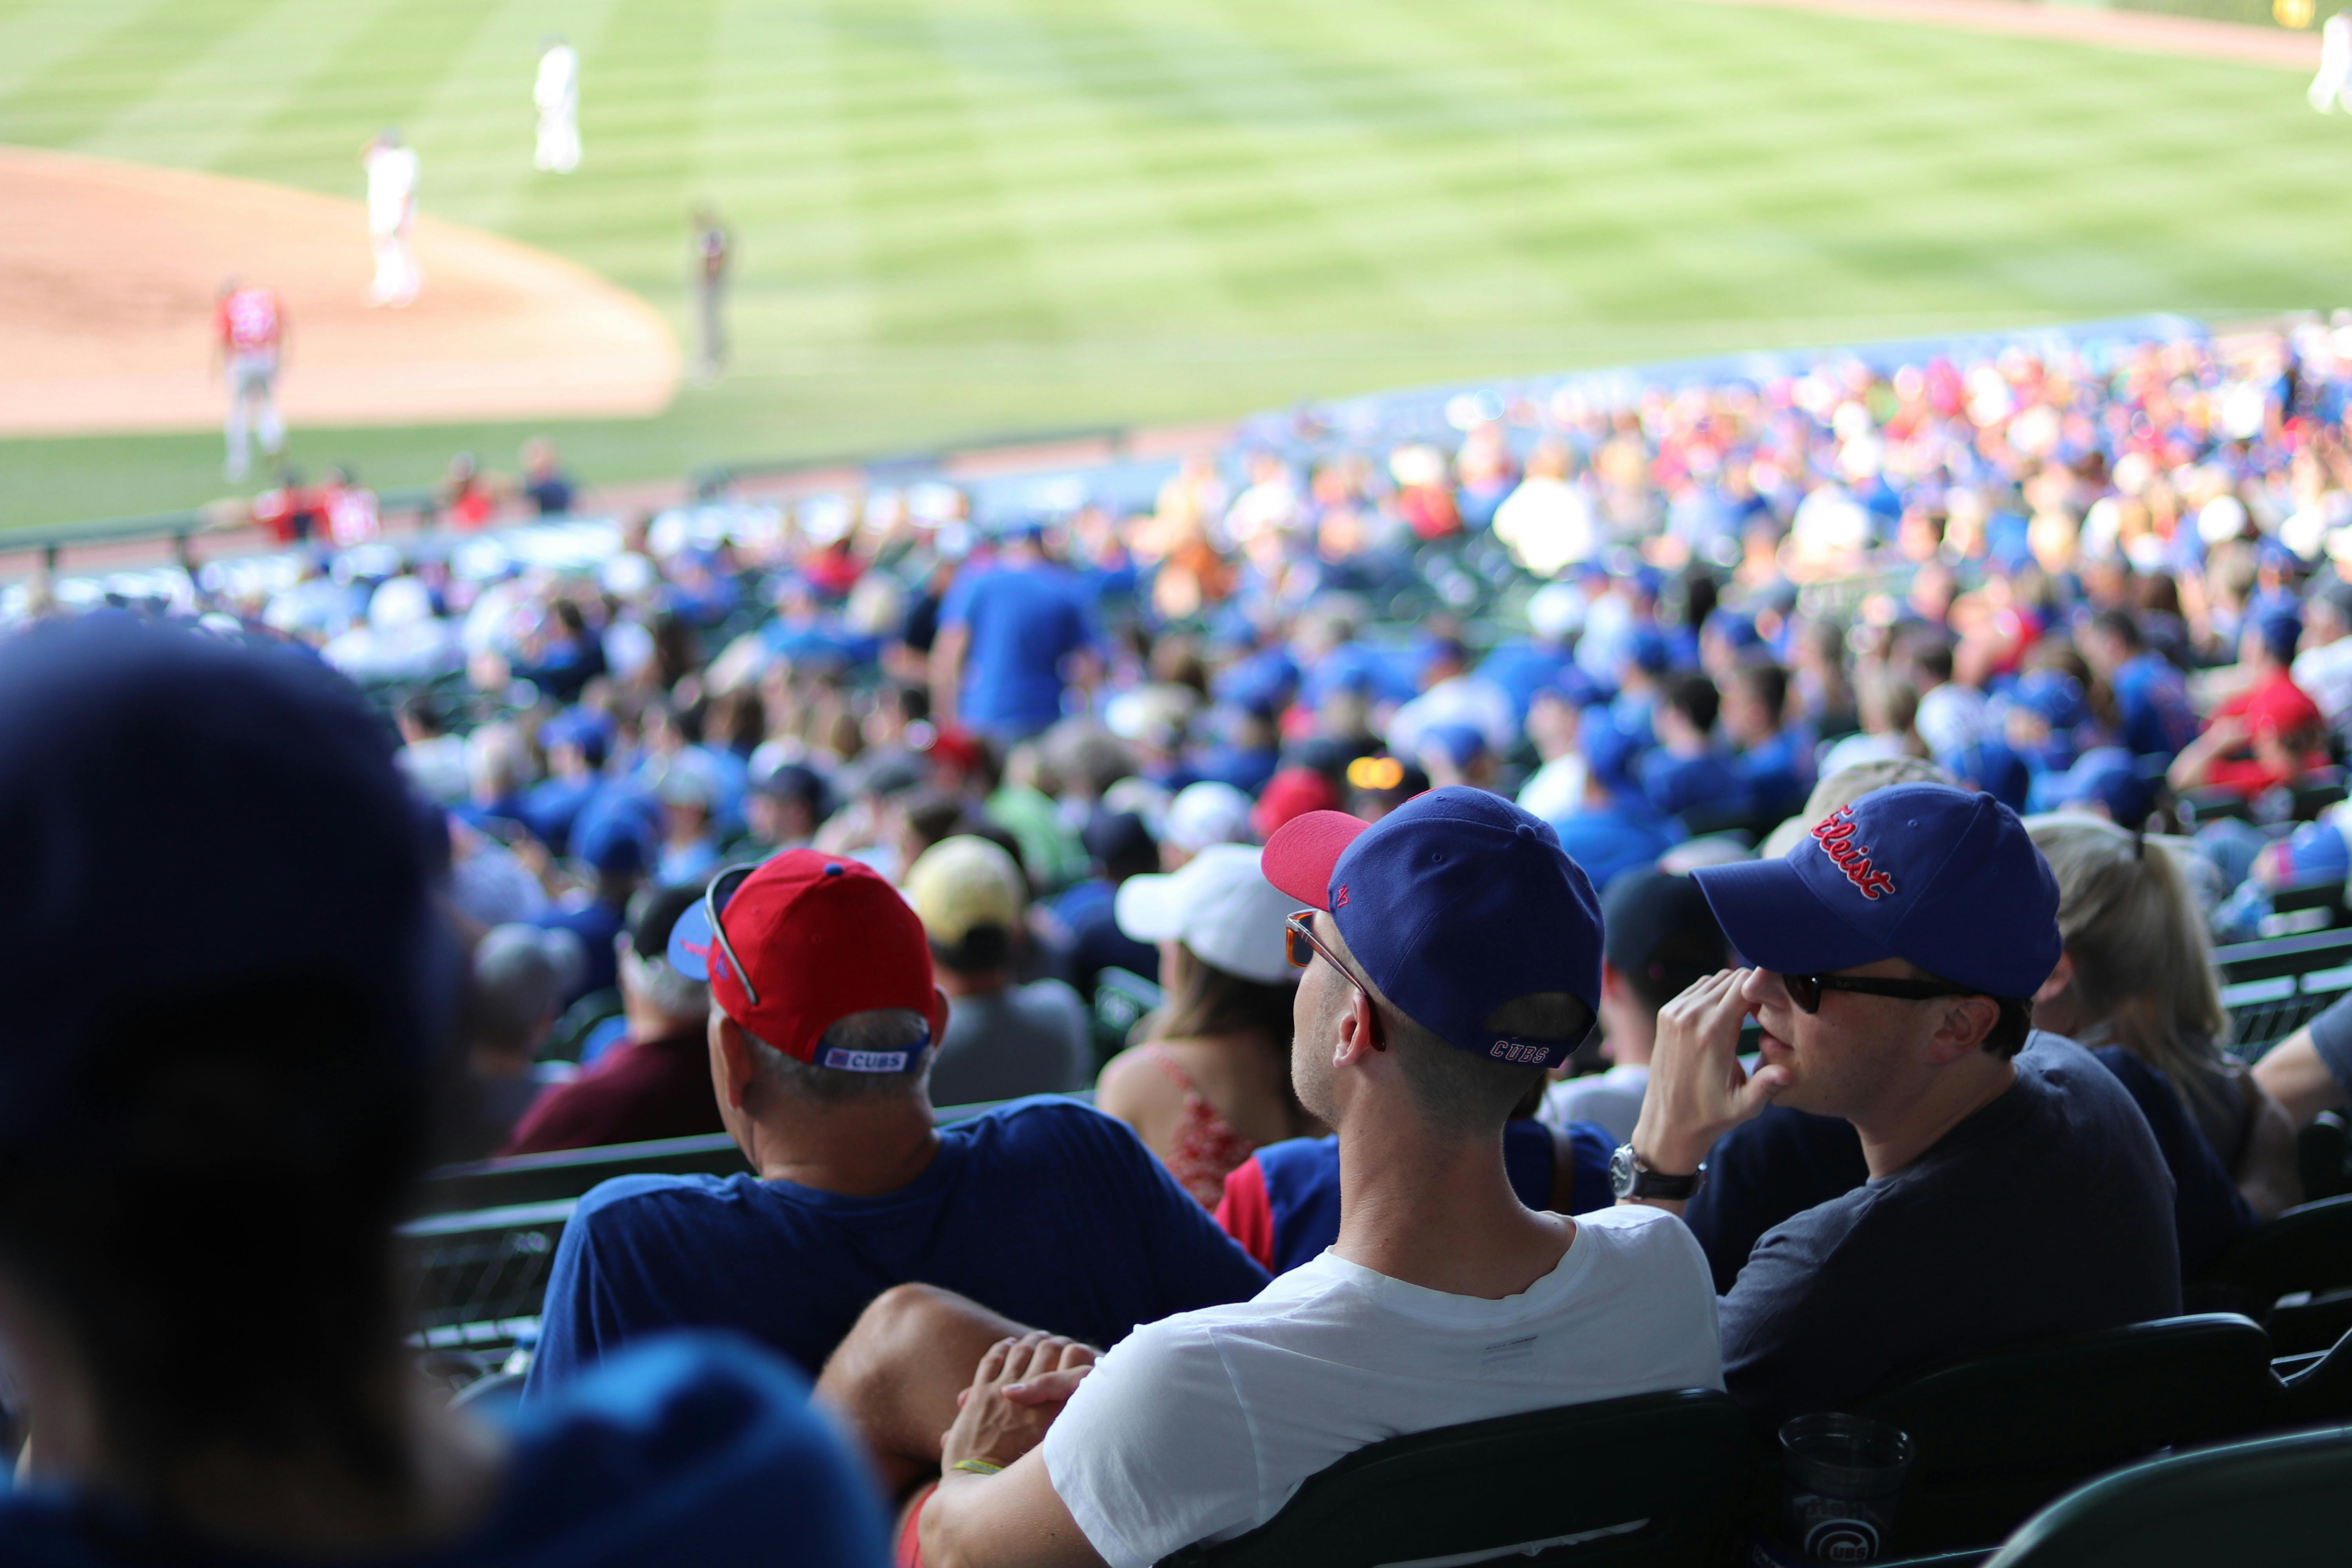 Wrigley Field visitor guide: everything you need to know - Bounce